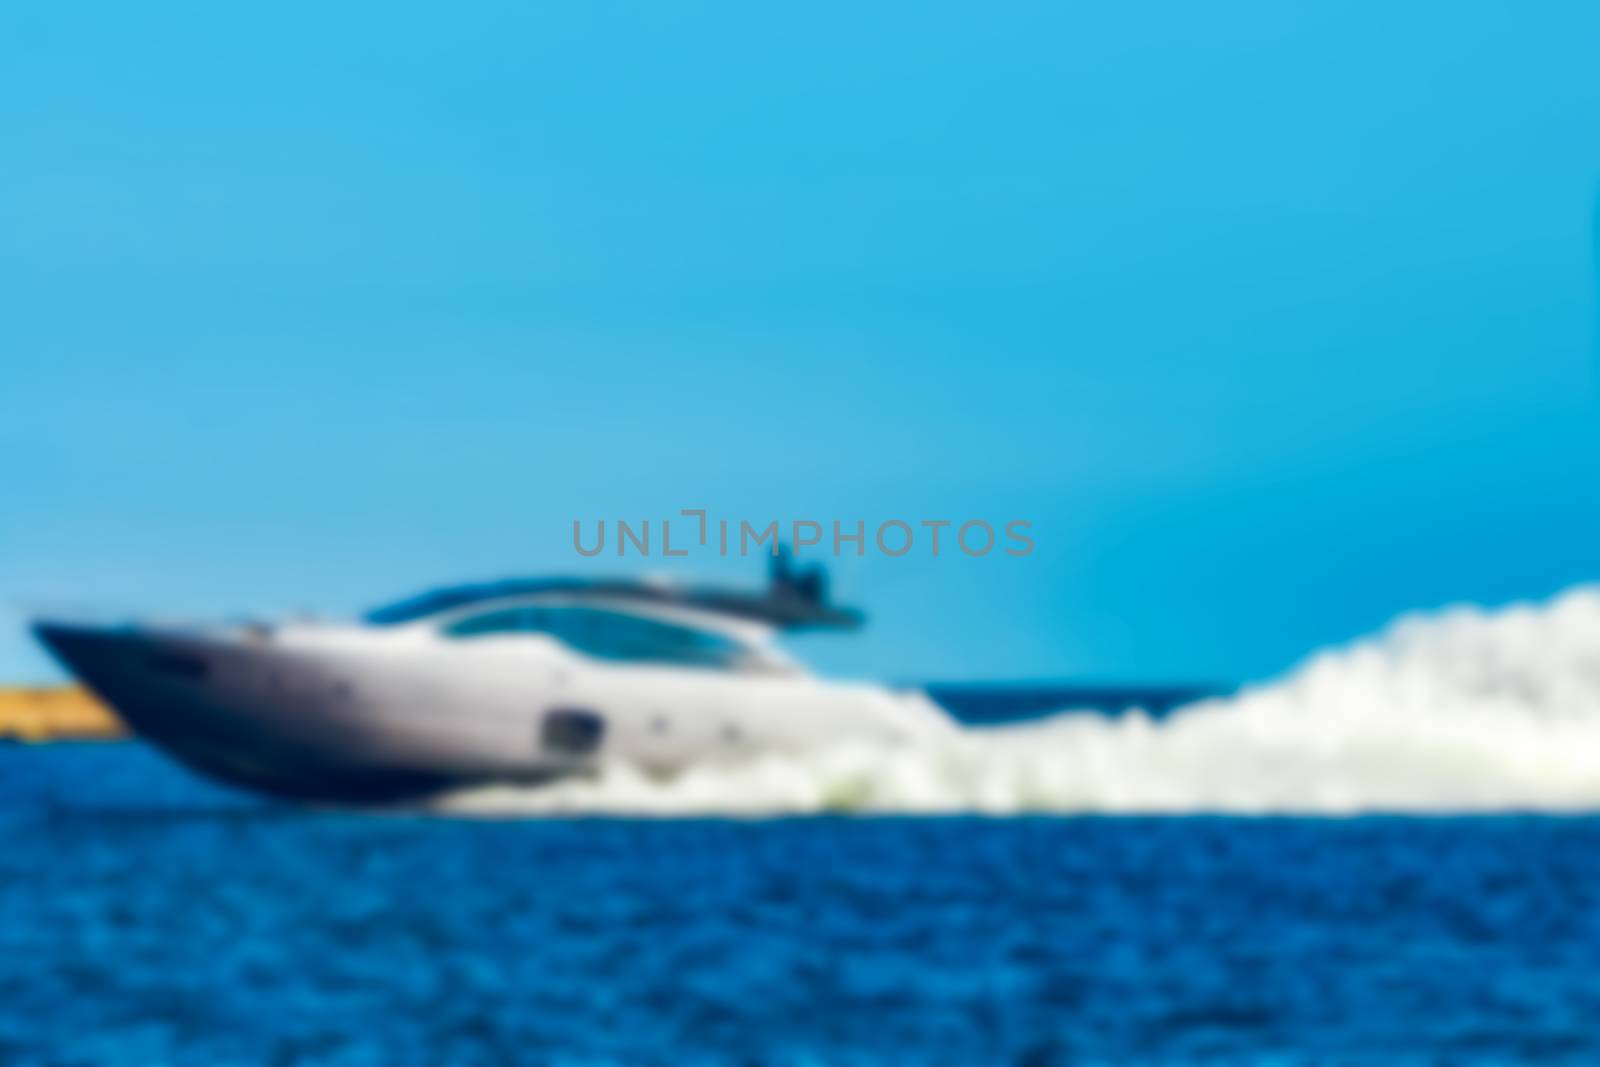 Speed boat - blurred image by sengnsp